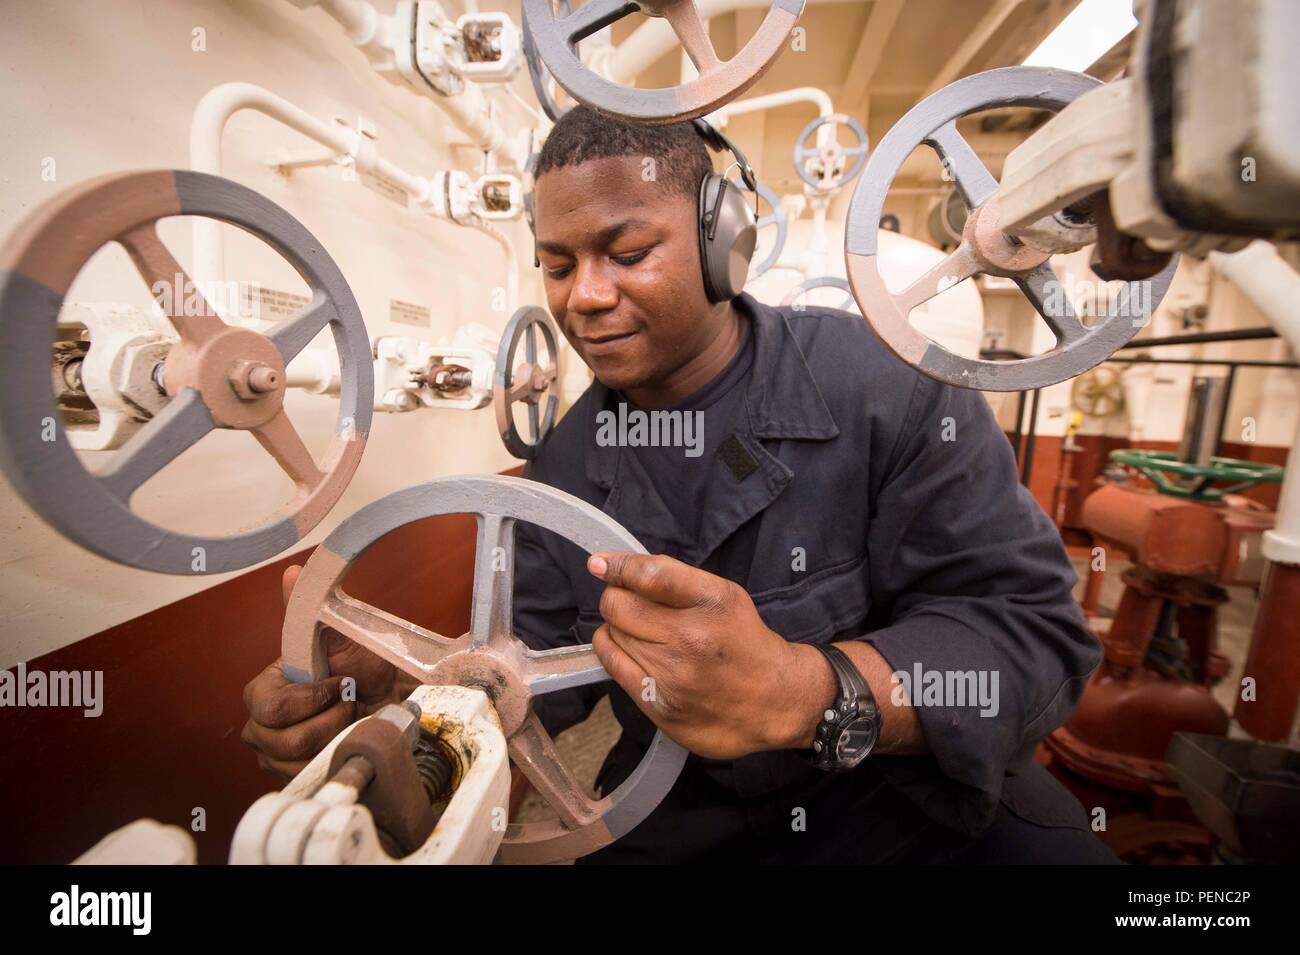 151218-N-GR361-187   RED SEA (Dec. 18, 2015) Fireman Apprentice Oscine Banton, from Virginia Beach, Va., checks a valve in an auxiliary machinery space aboard the amphibious transport dock ship USS Arlington (LPD 24). Arlington is part of the Kearsarge Amphibious Ready Group (ARG) and, with the embarked 26th Marine Expeditionary Unit (MEU), is deployed in support of maritime security operations and theater security cooperation efforts in the U.S. 5th Fleet area of operations. (U.S. Navy photo by Mass Communication Specialist 3rd Class Kaleb R. Staples/Released) Stock Photo